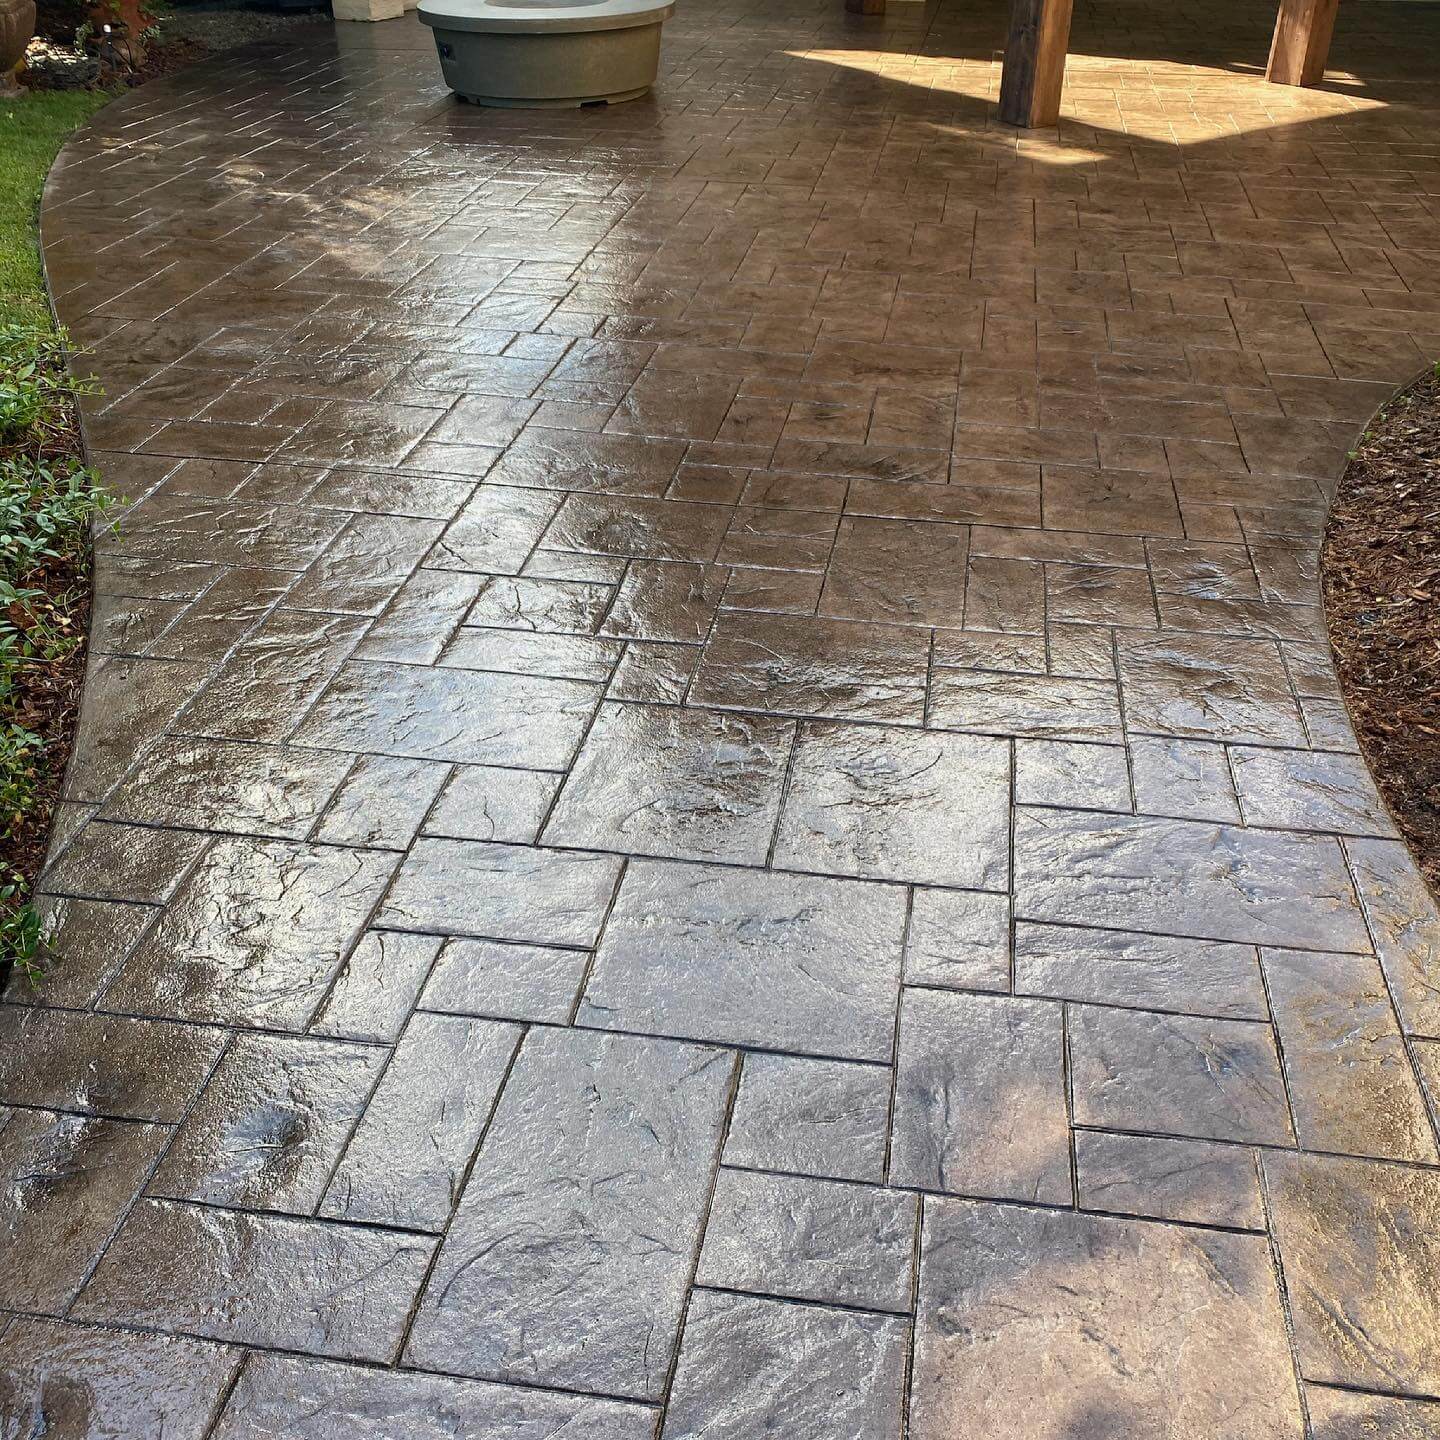 Stamped concrete patio looking new again after being repaired